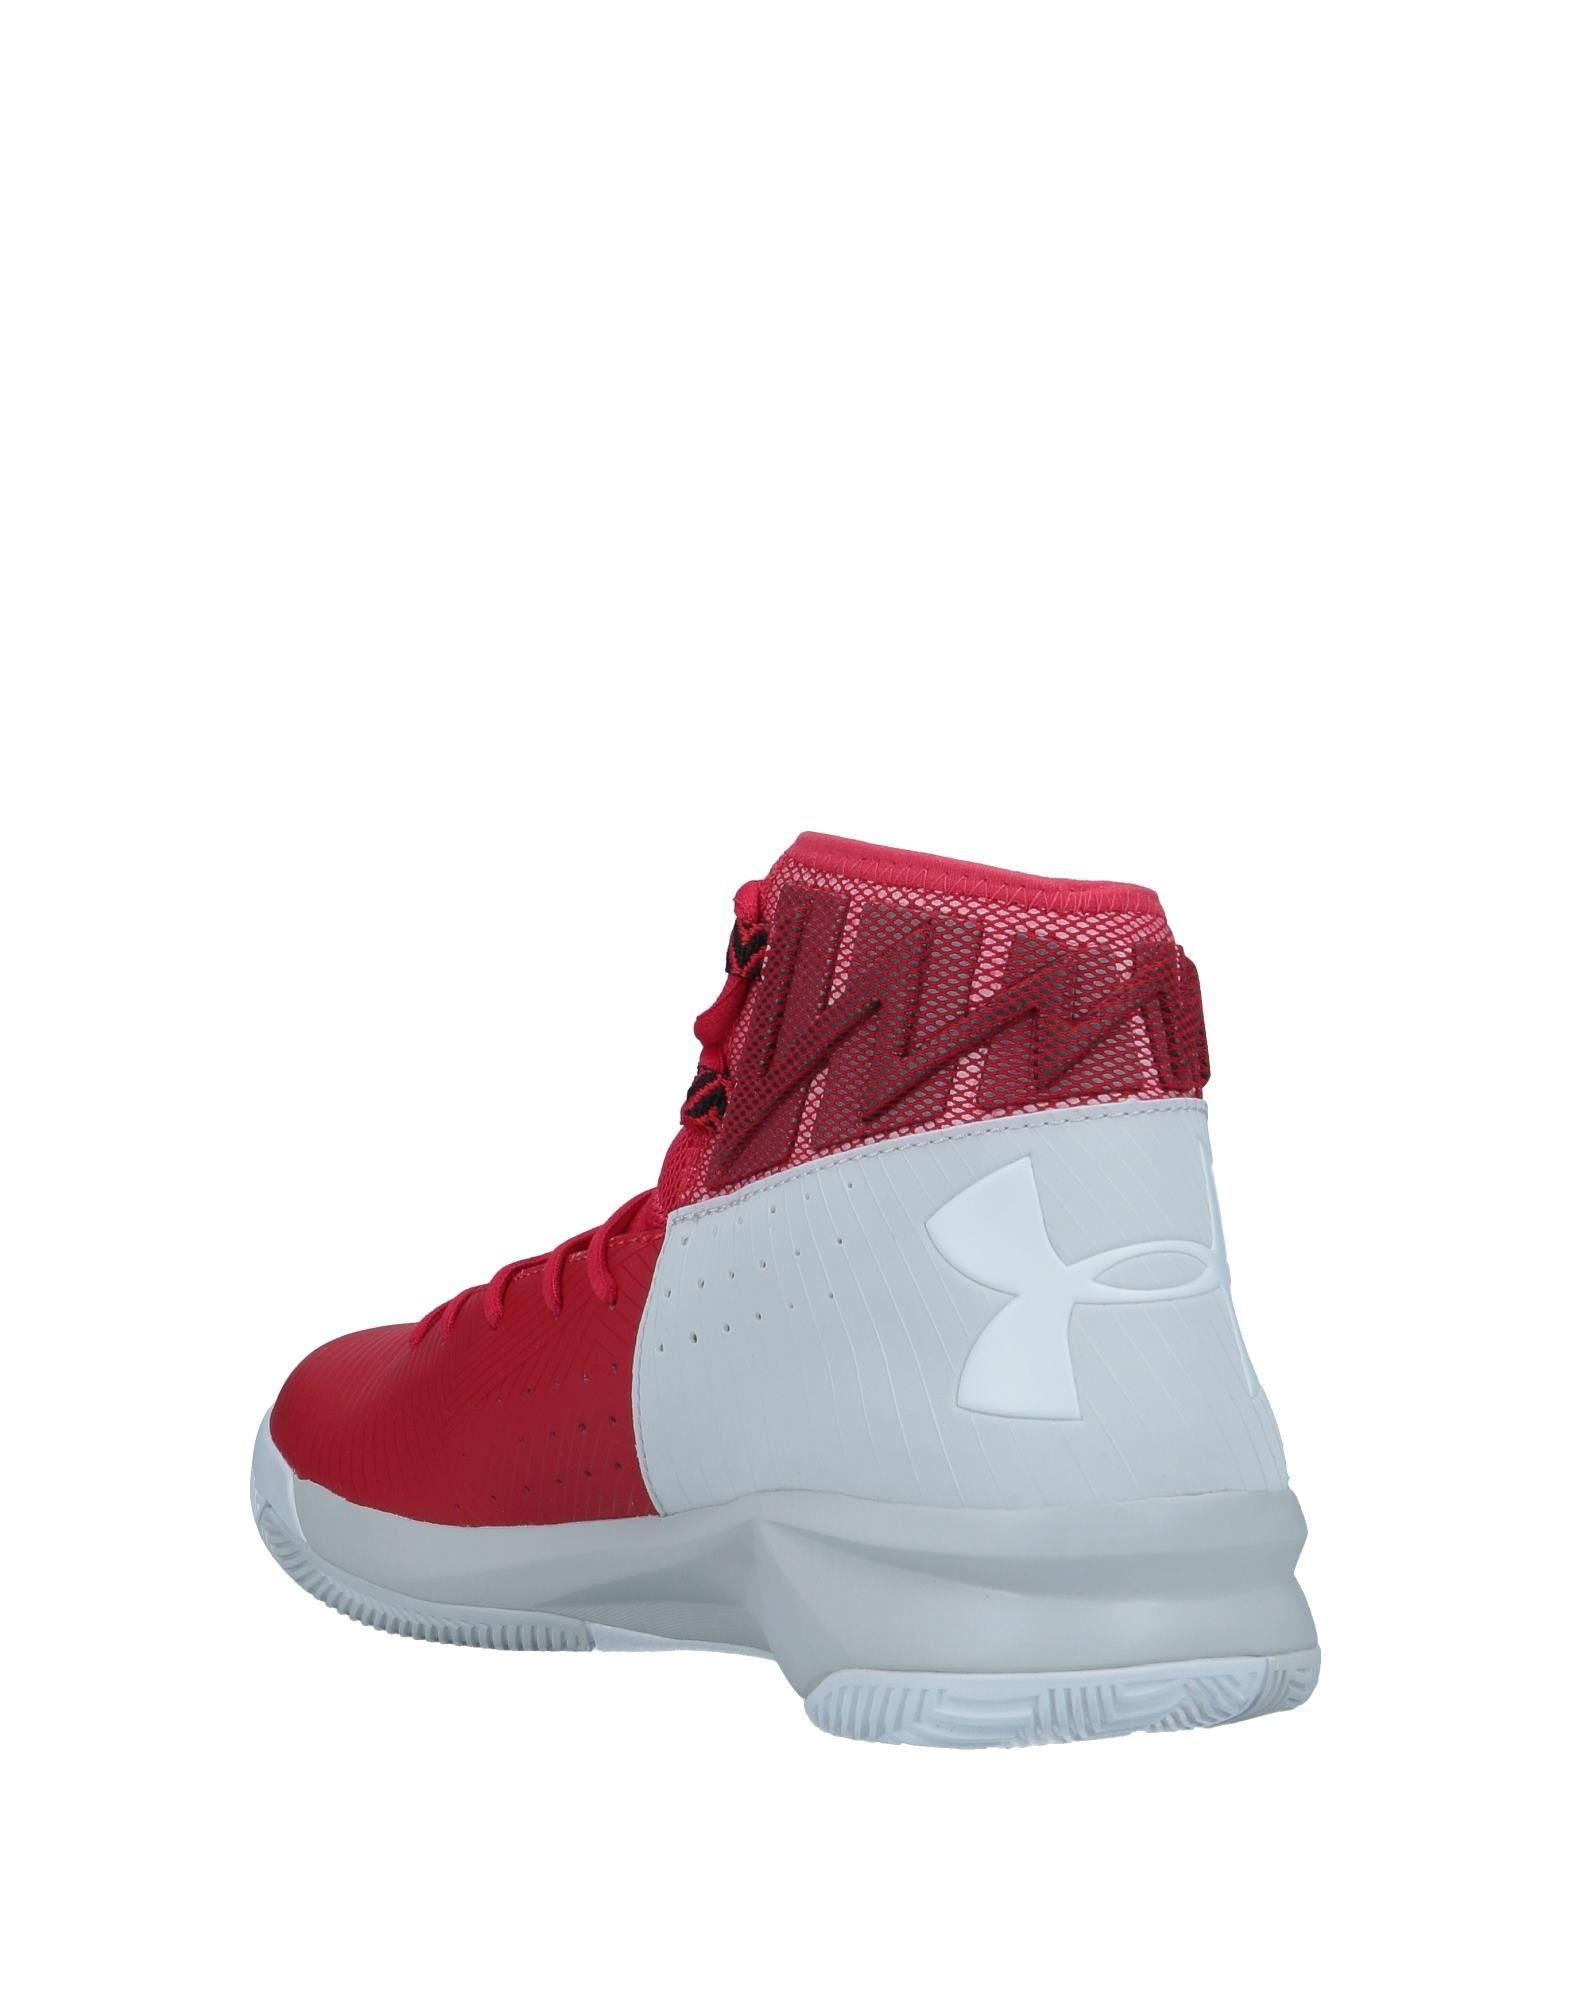 under armour red high tops off 54 